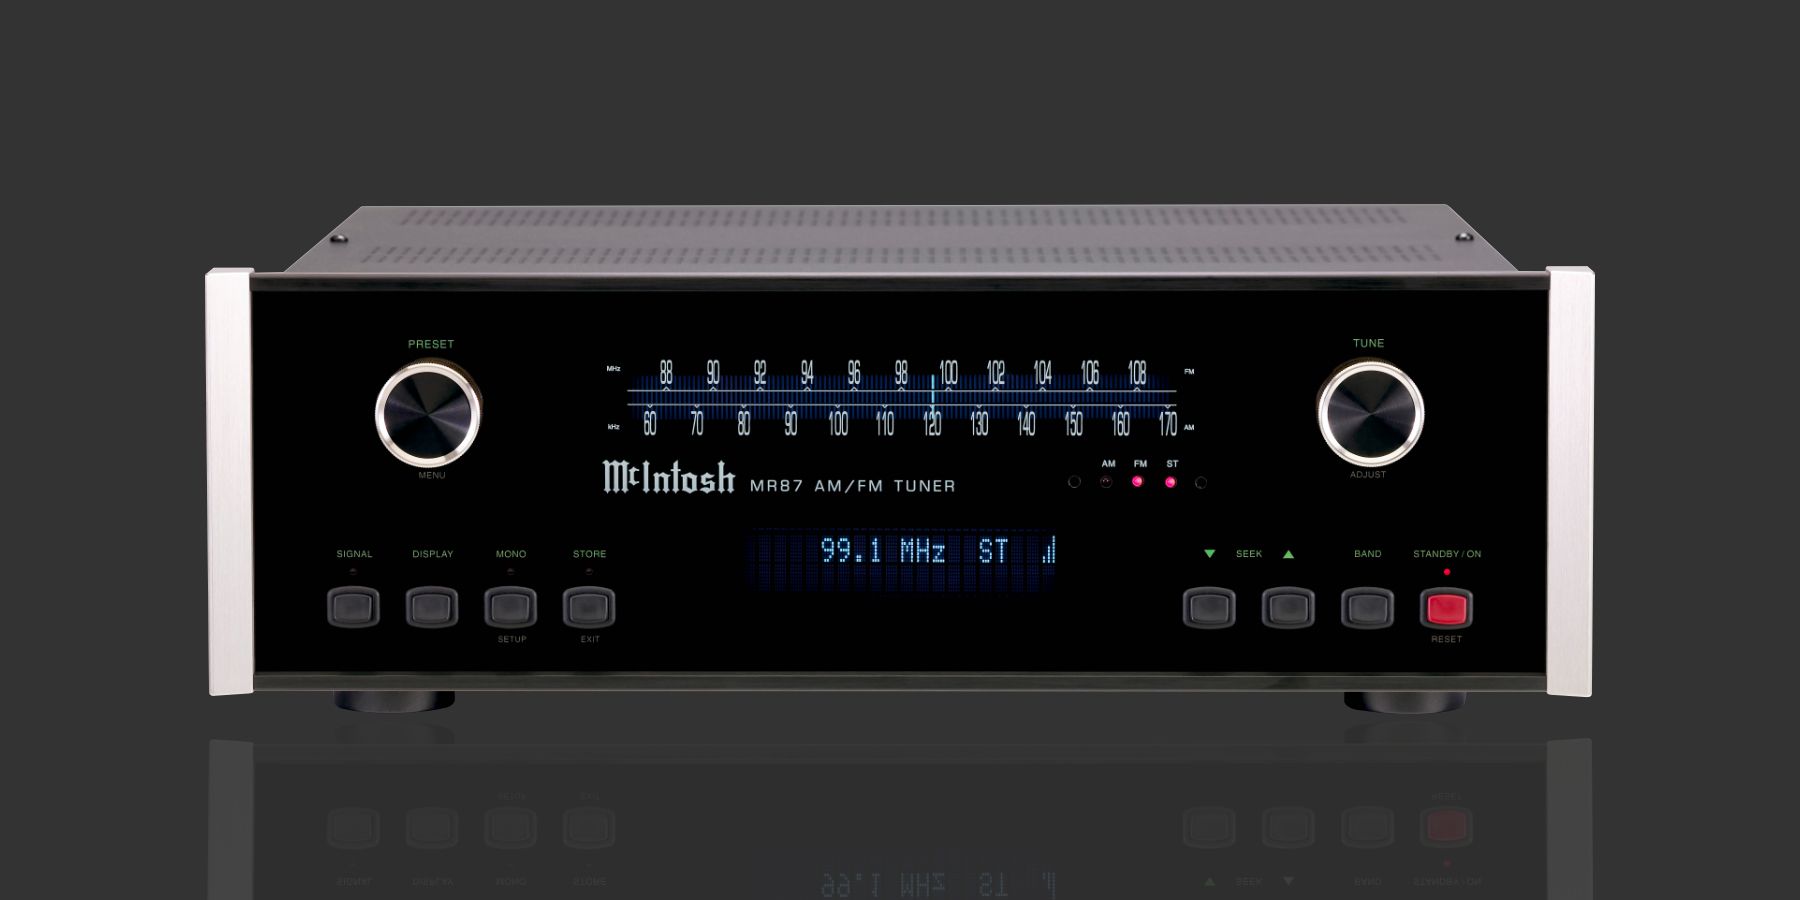 The McIntosh MR87 AM/FM Tuner has been discontinued